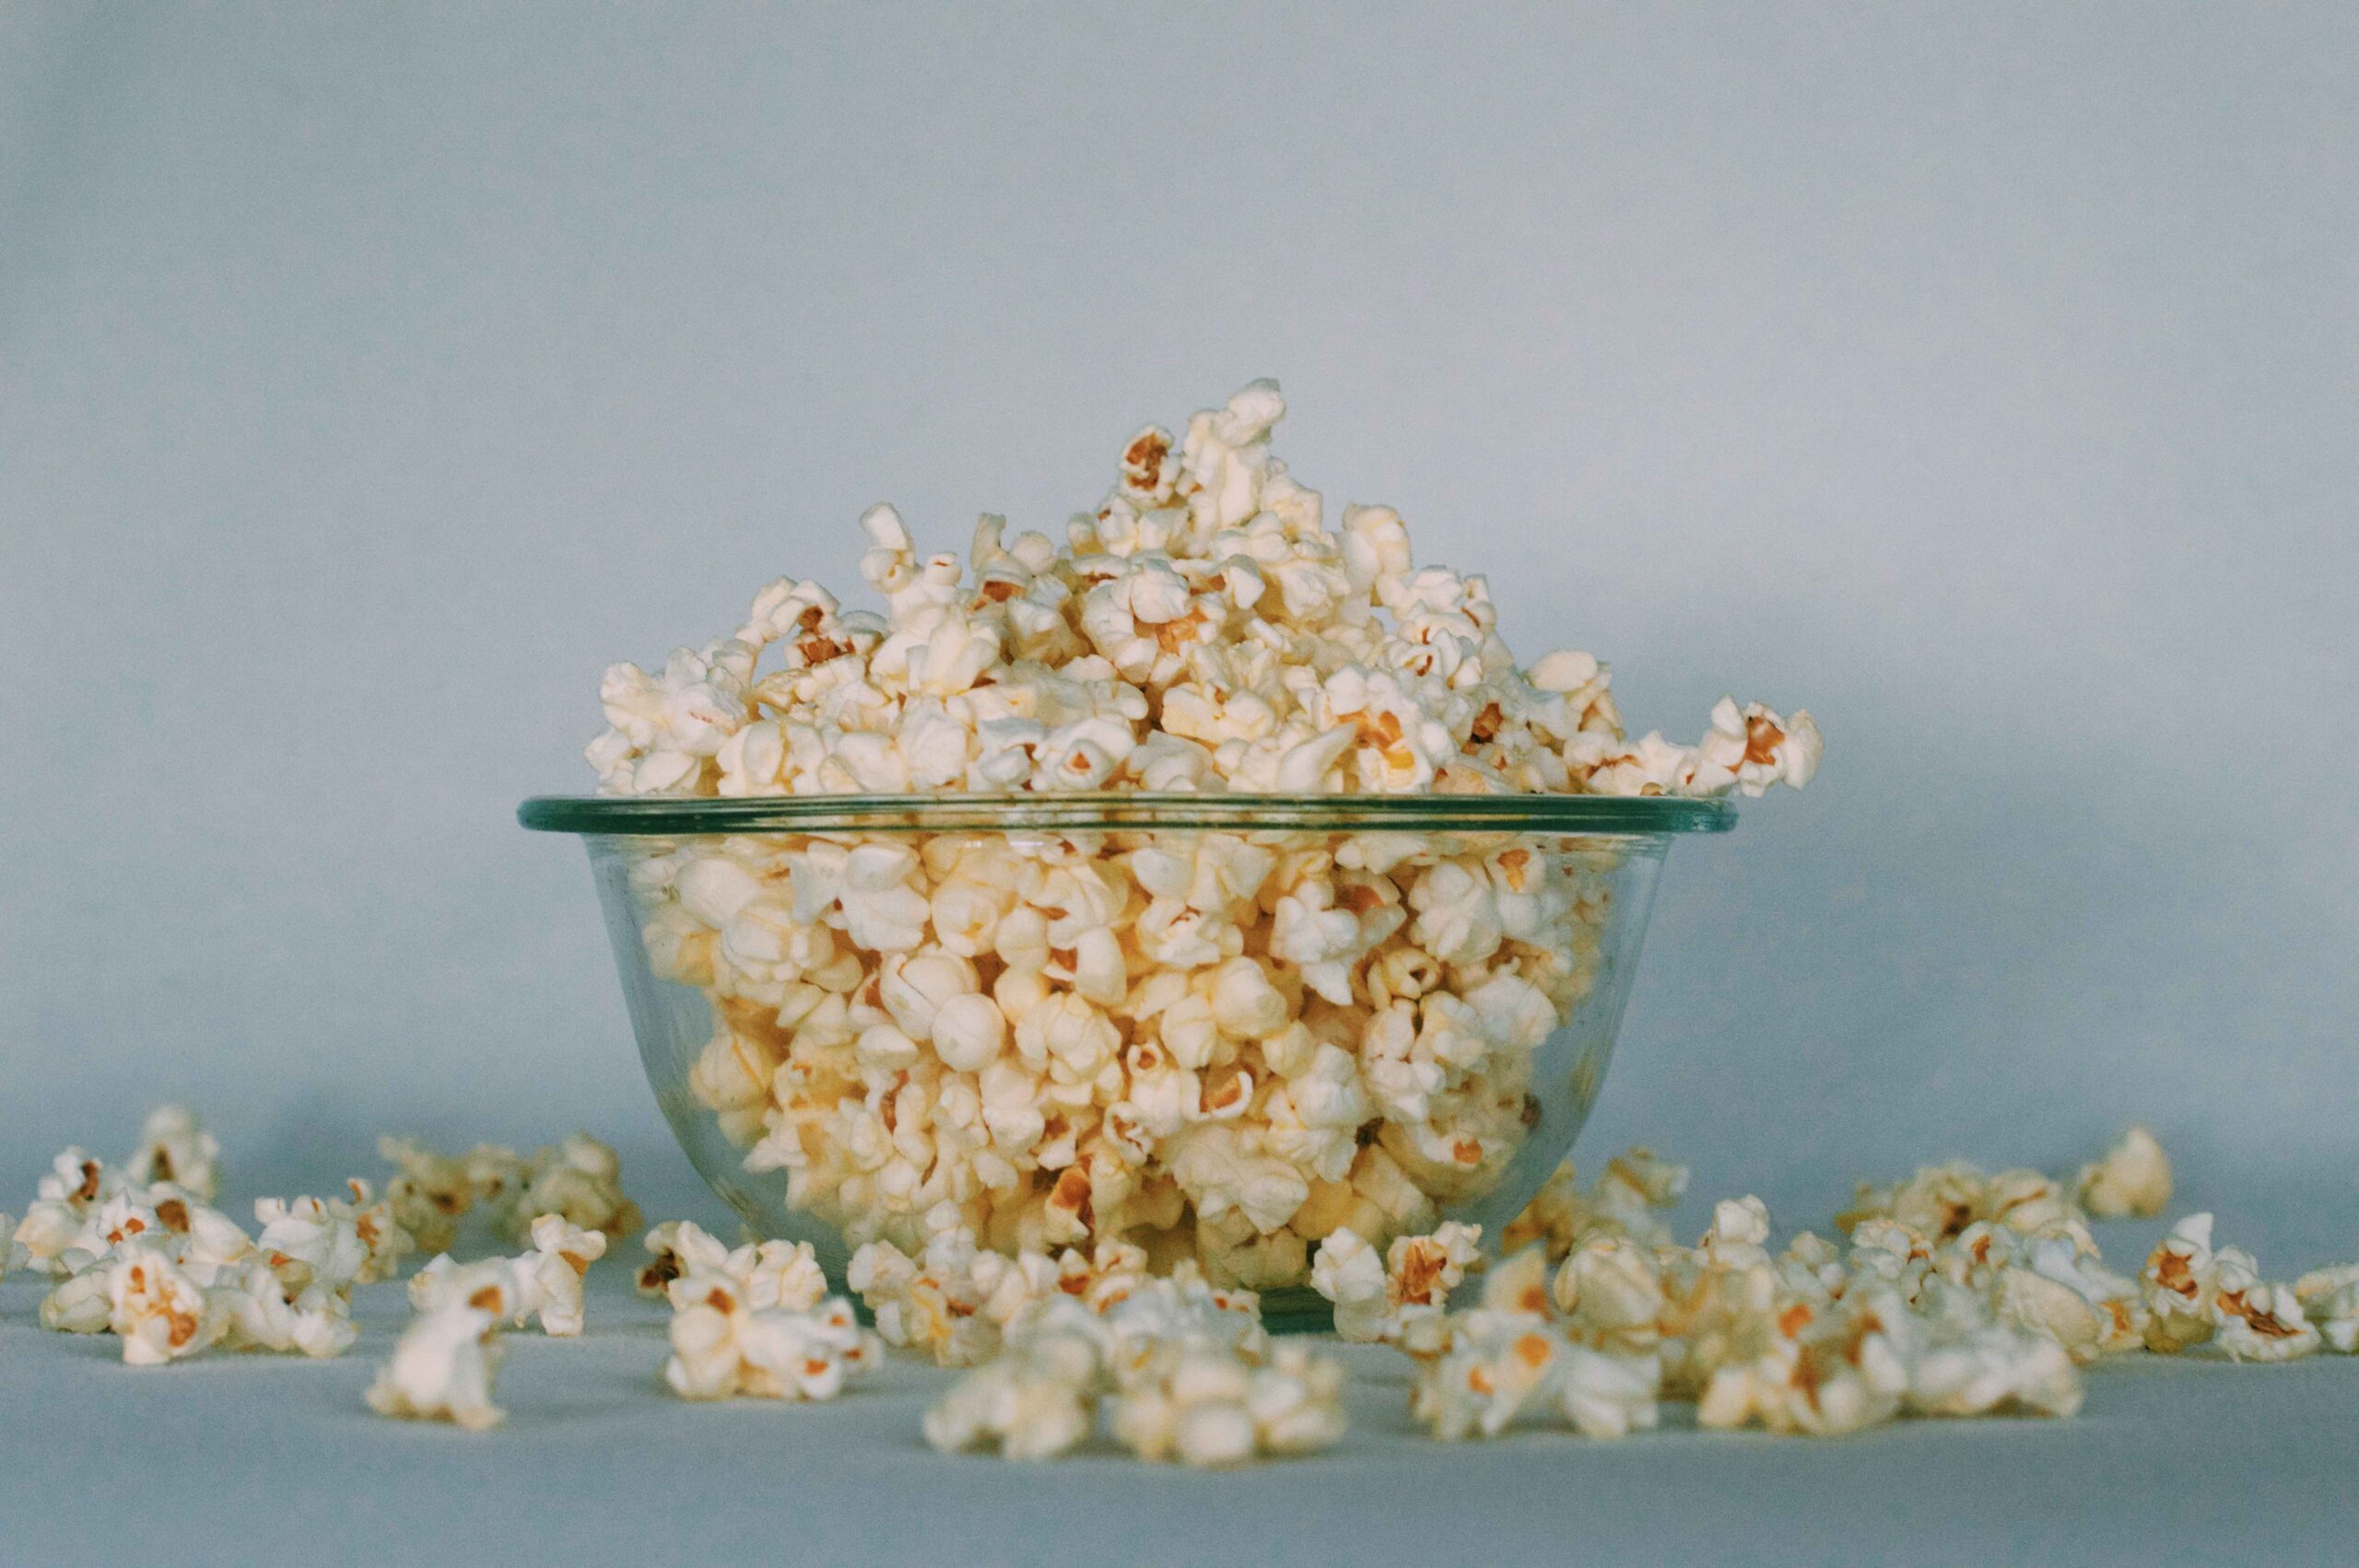 Salted popcorn for Low calorie snacks when feeling stressed